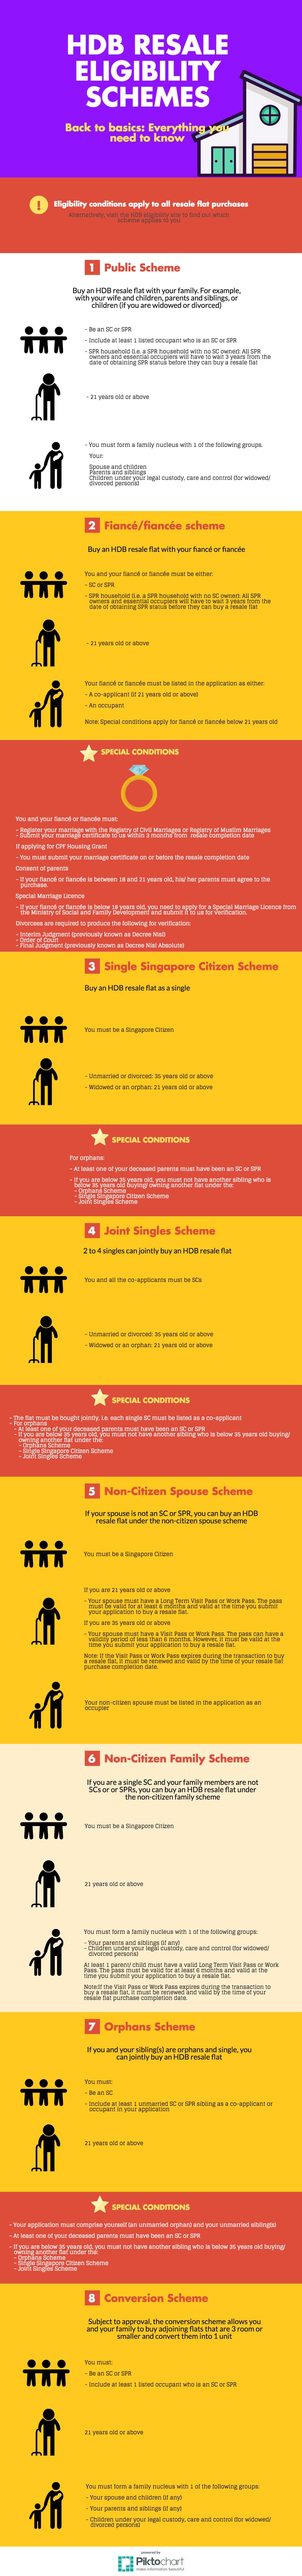 HDB resale eligibility infographic